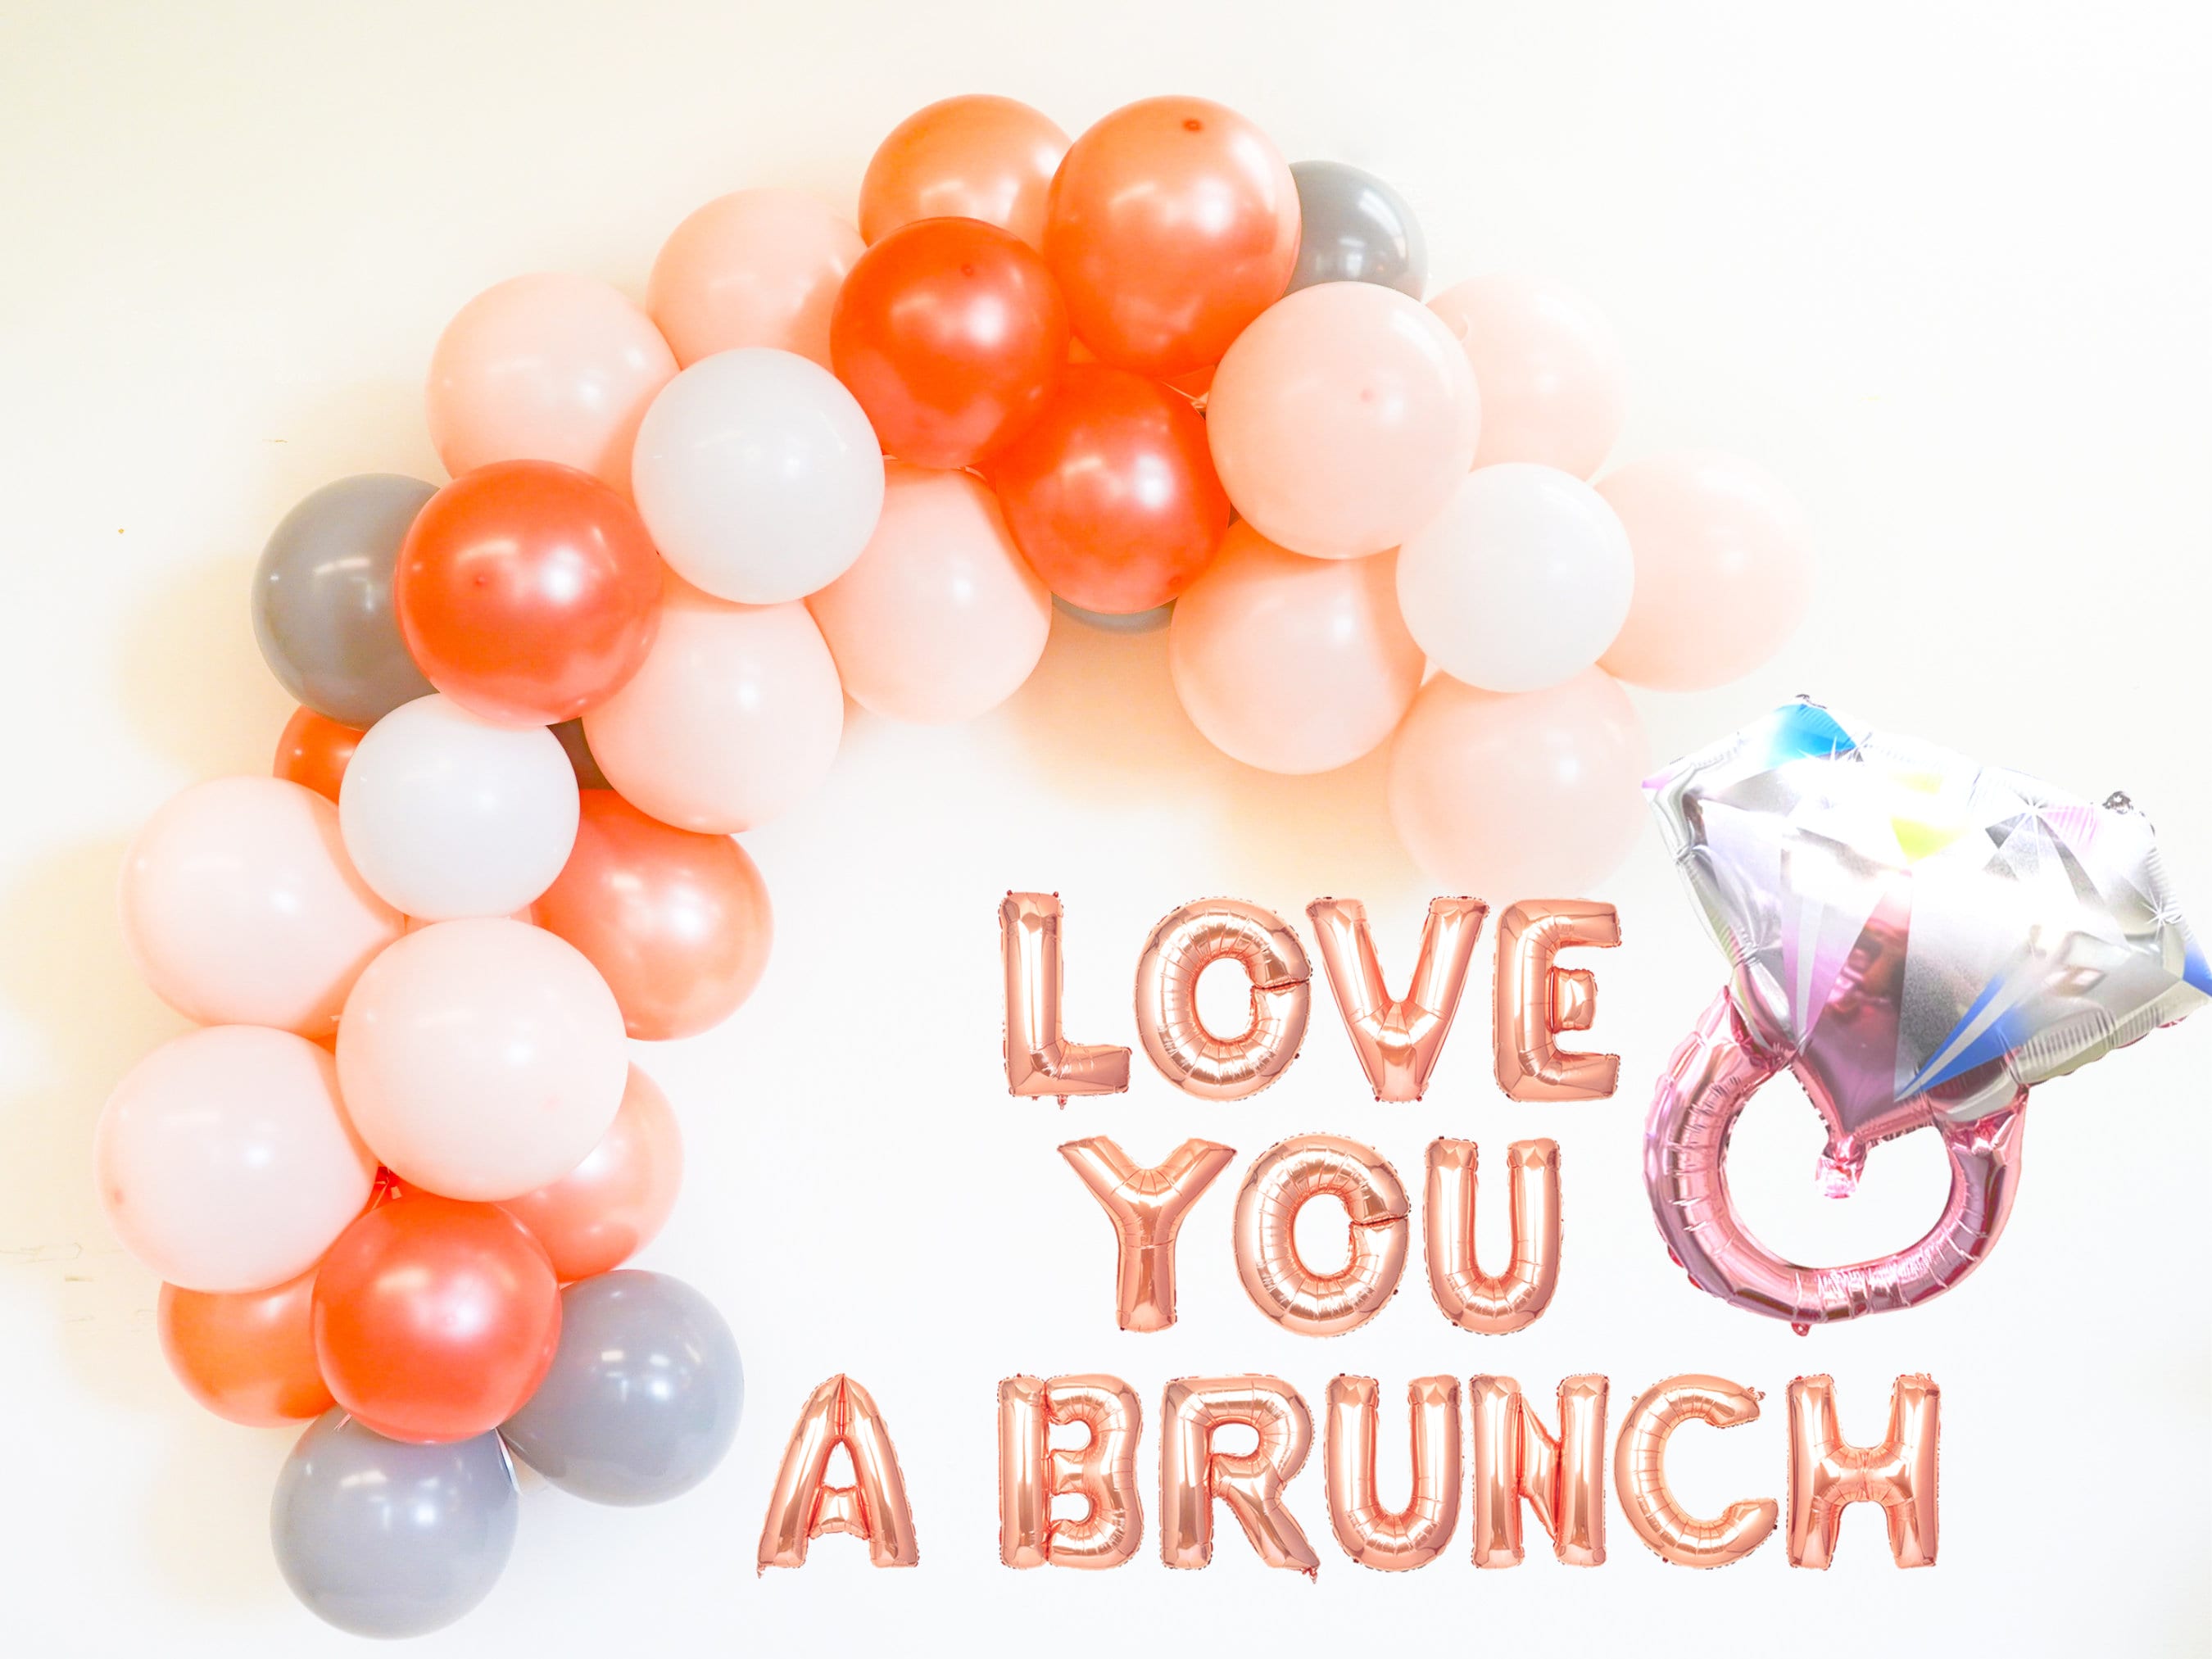 Btxlhaohe Love You A Brunch Balloons Banner Bridal Brunch Party Decorations Supplies Bachelorette Party Bridal Shower Party Decor Supplies